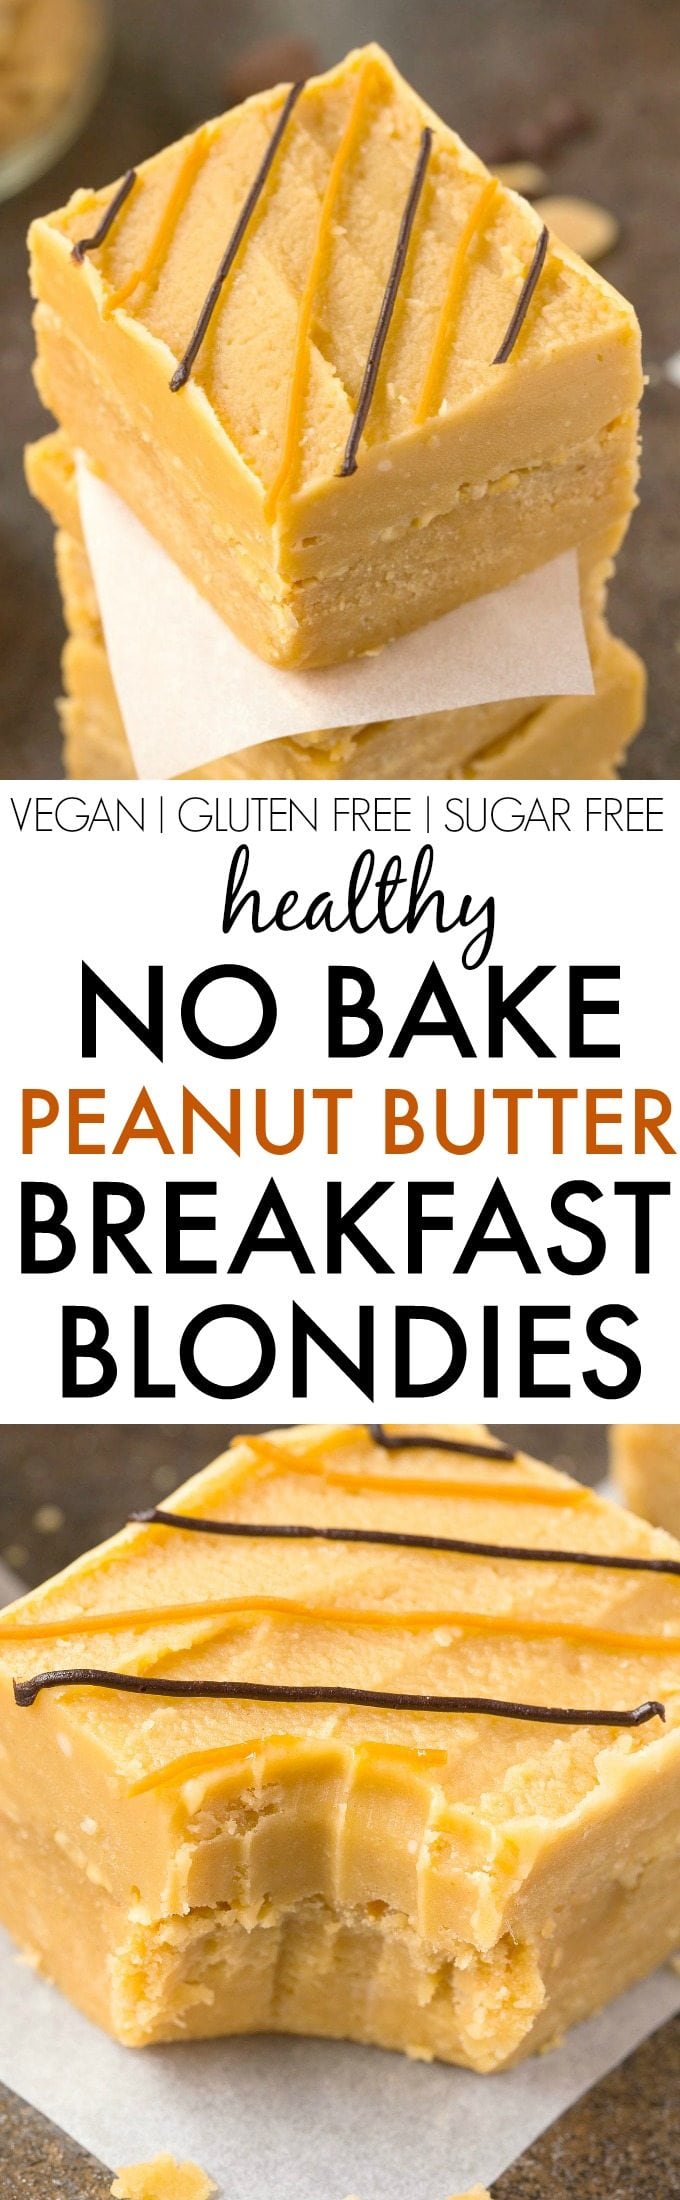 Healthy NO BAKE Peanut Butter BREAKFAST Blondies- Thick, chewy and like having dessert for breakfast but healthy- NO nasties and packed with protein- Nut free and peanut free option too! {vegan, gluten free, paleo recipe}- thebigmansworld.com